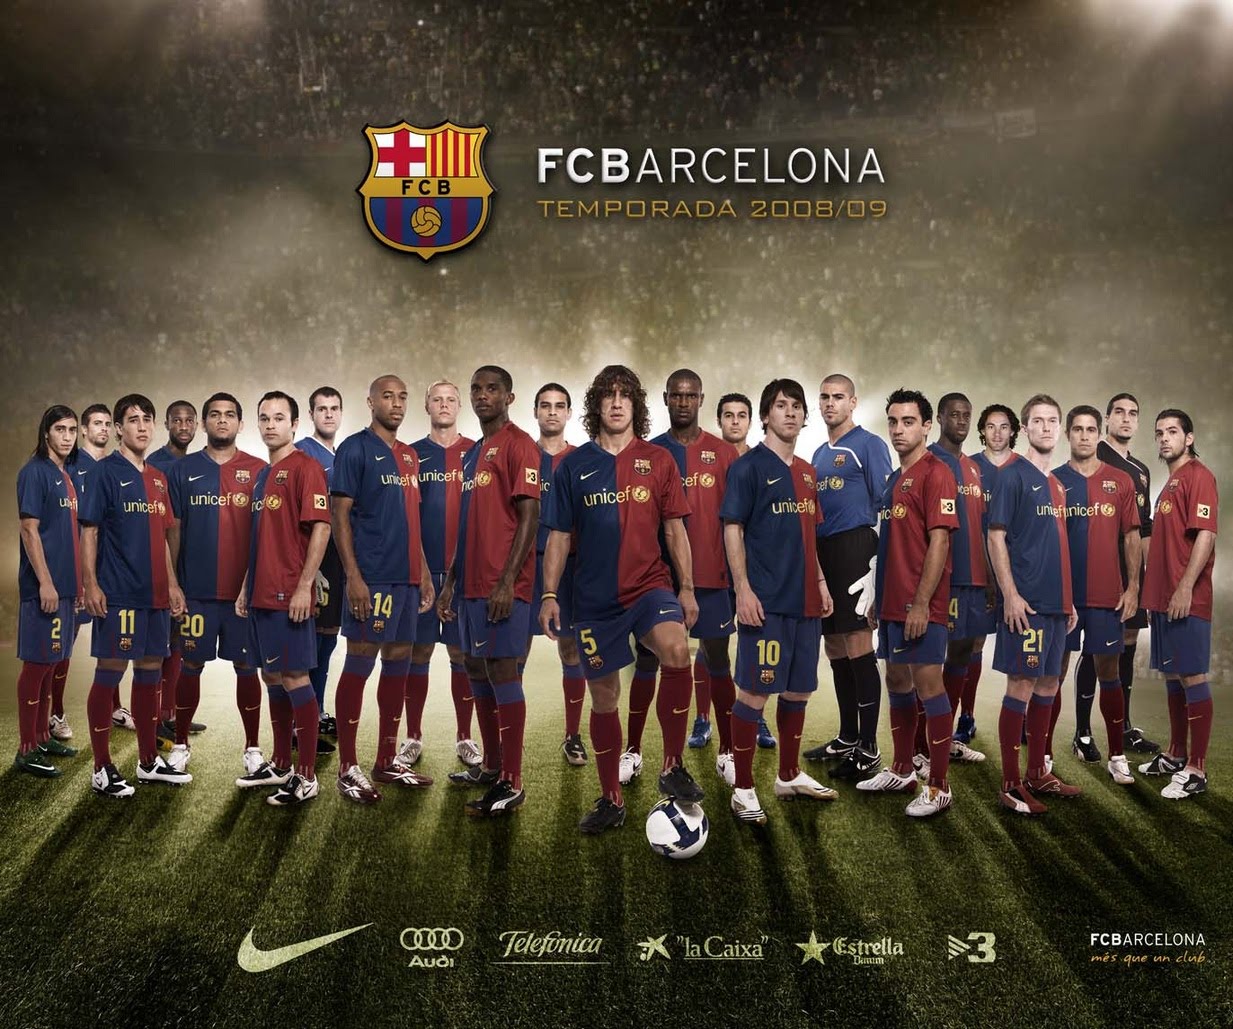 SOCCER PLAYERS WALLPAPER 2010 2011 Barcelona Football Club Pictures